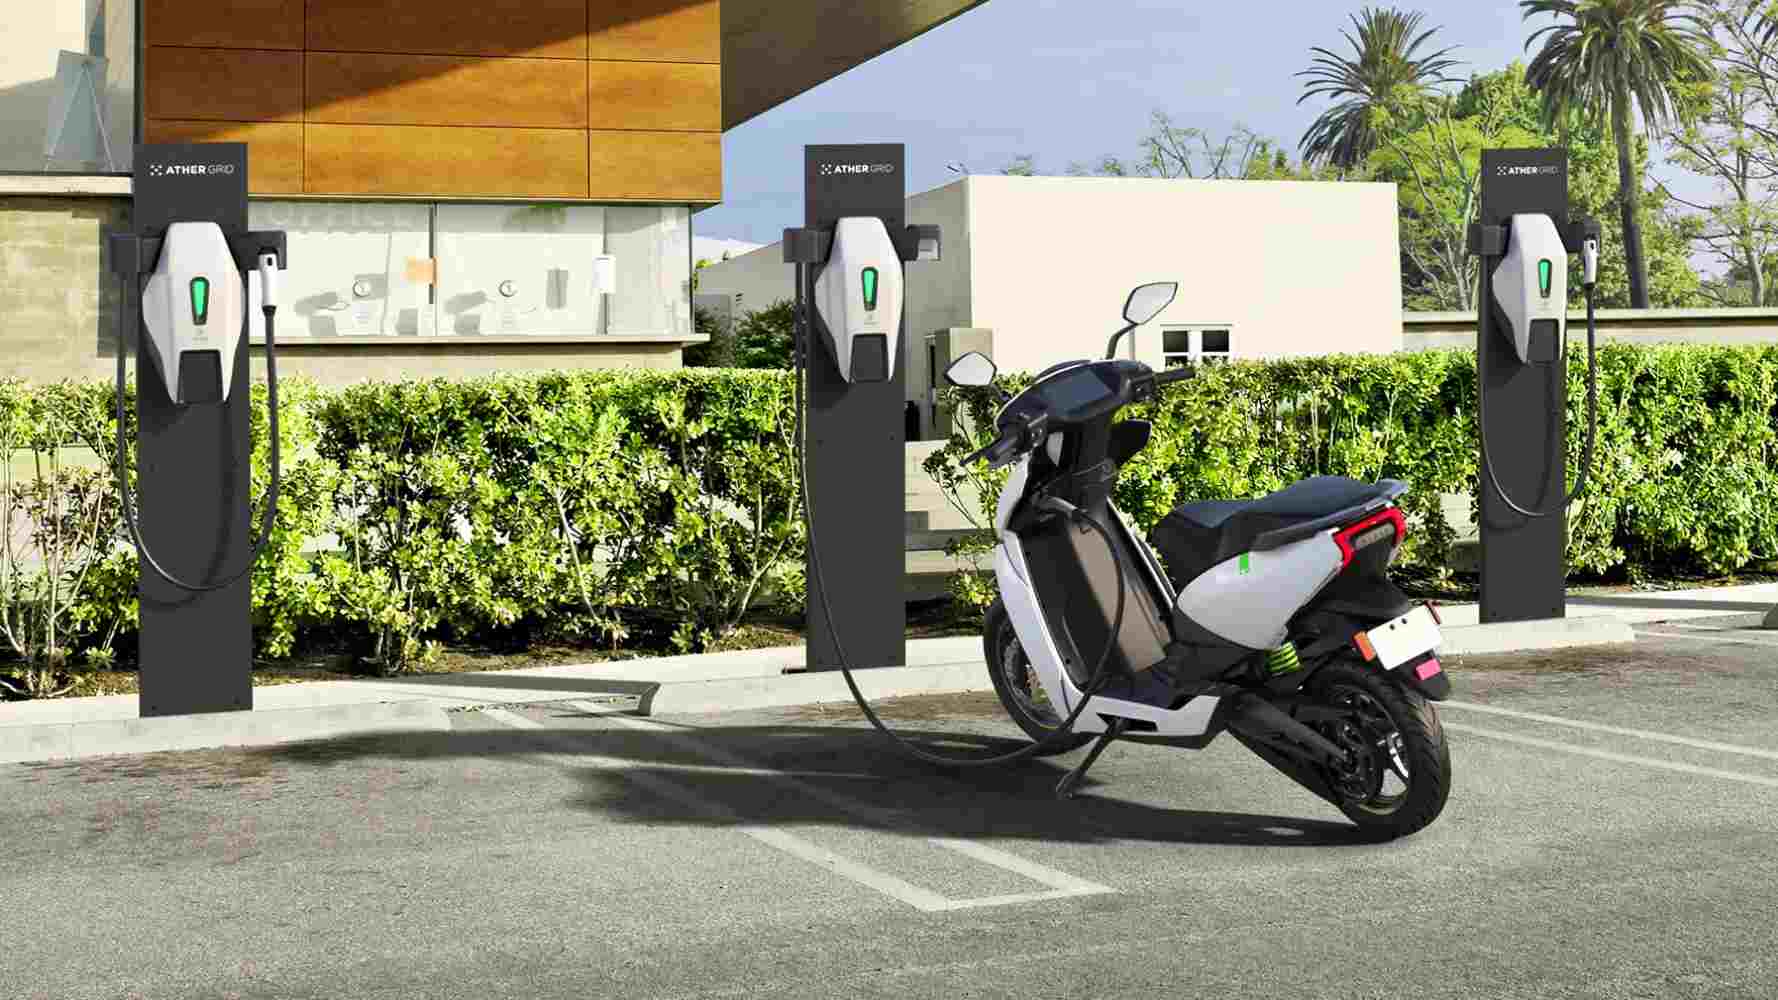 Ather Energy is targeting installation of nearly 400 fast-charging points across India by the end of 2021. Image: Ather Energy